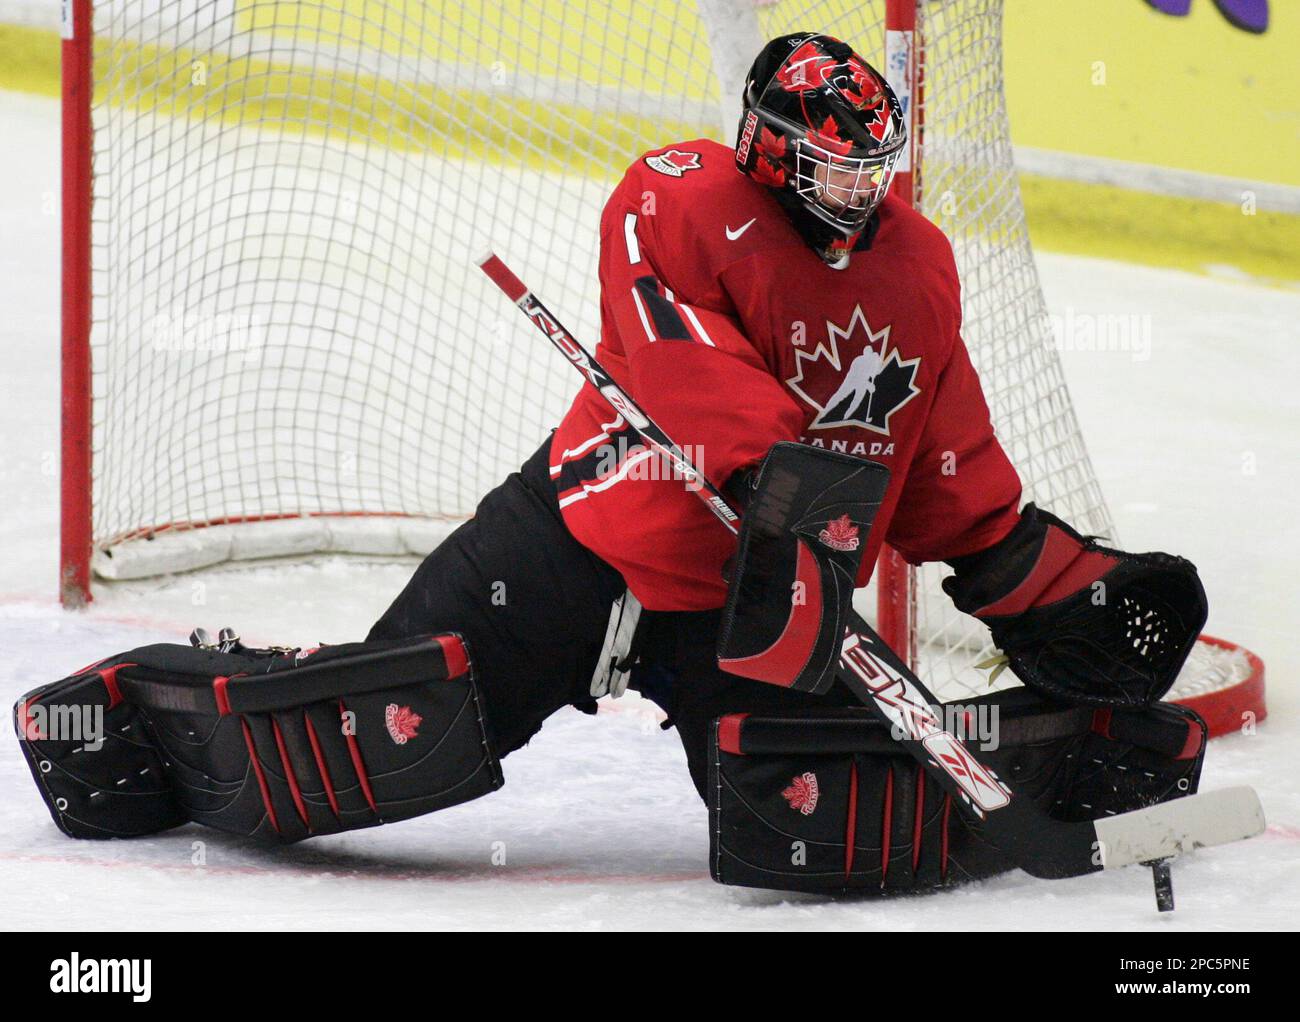 Team Canada goalie Carey Price makes a save in their 3-1 win over team Germany during the World U20 hockey championship Friday, Dec